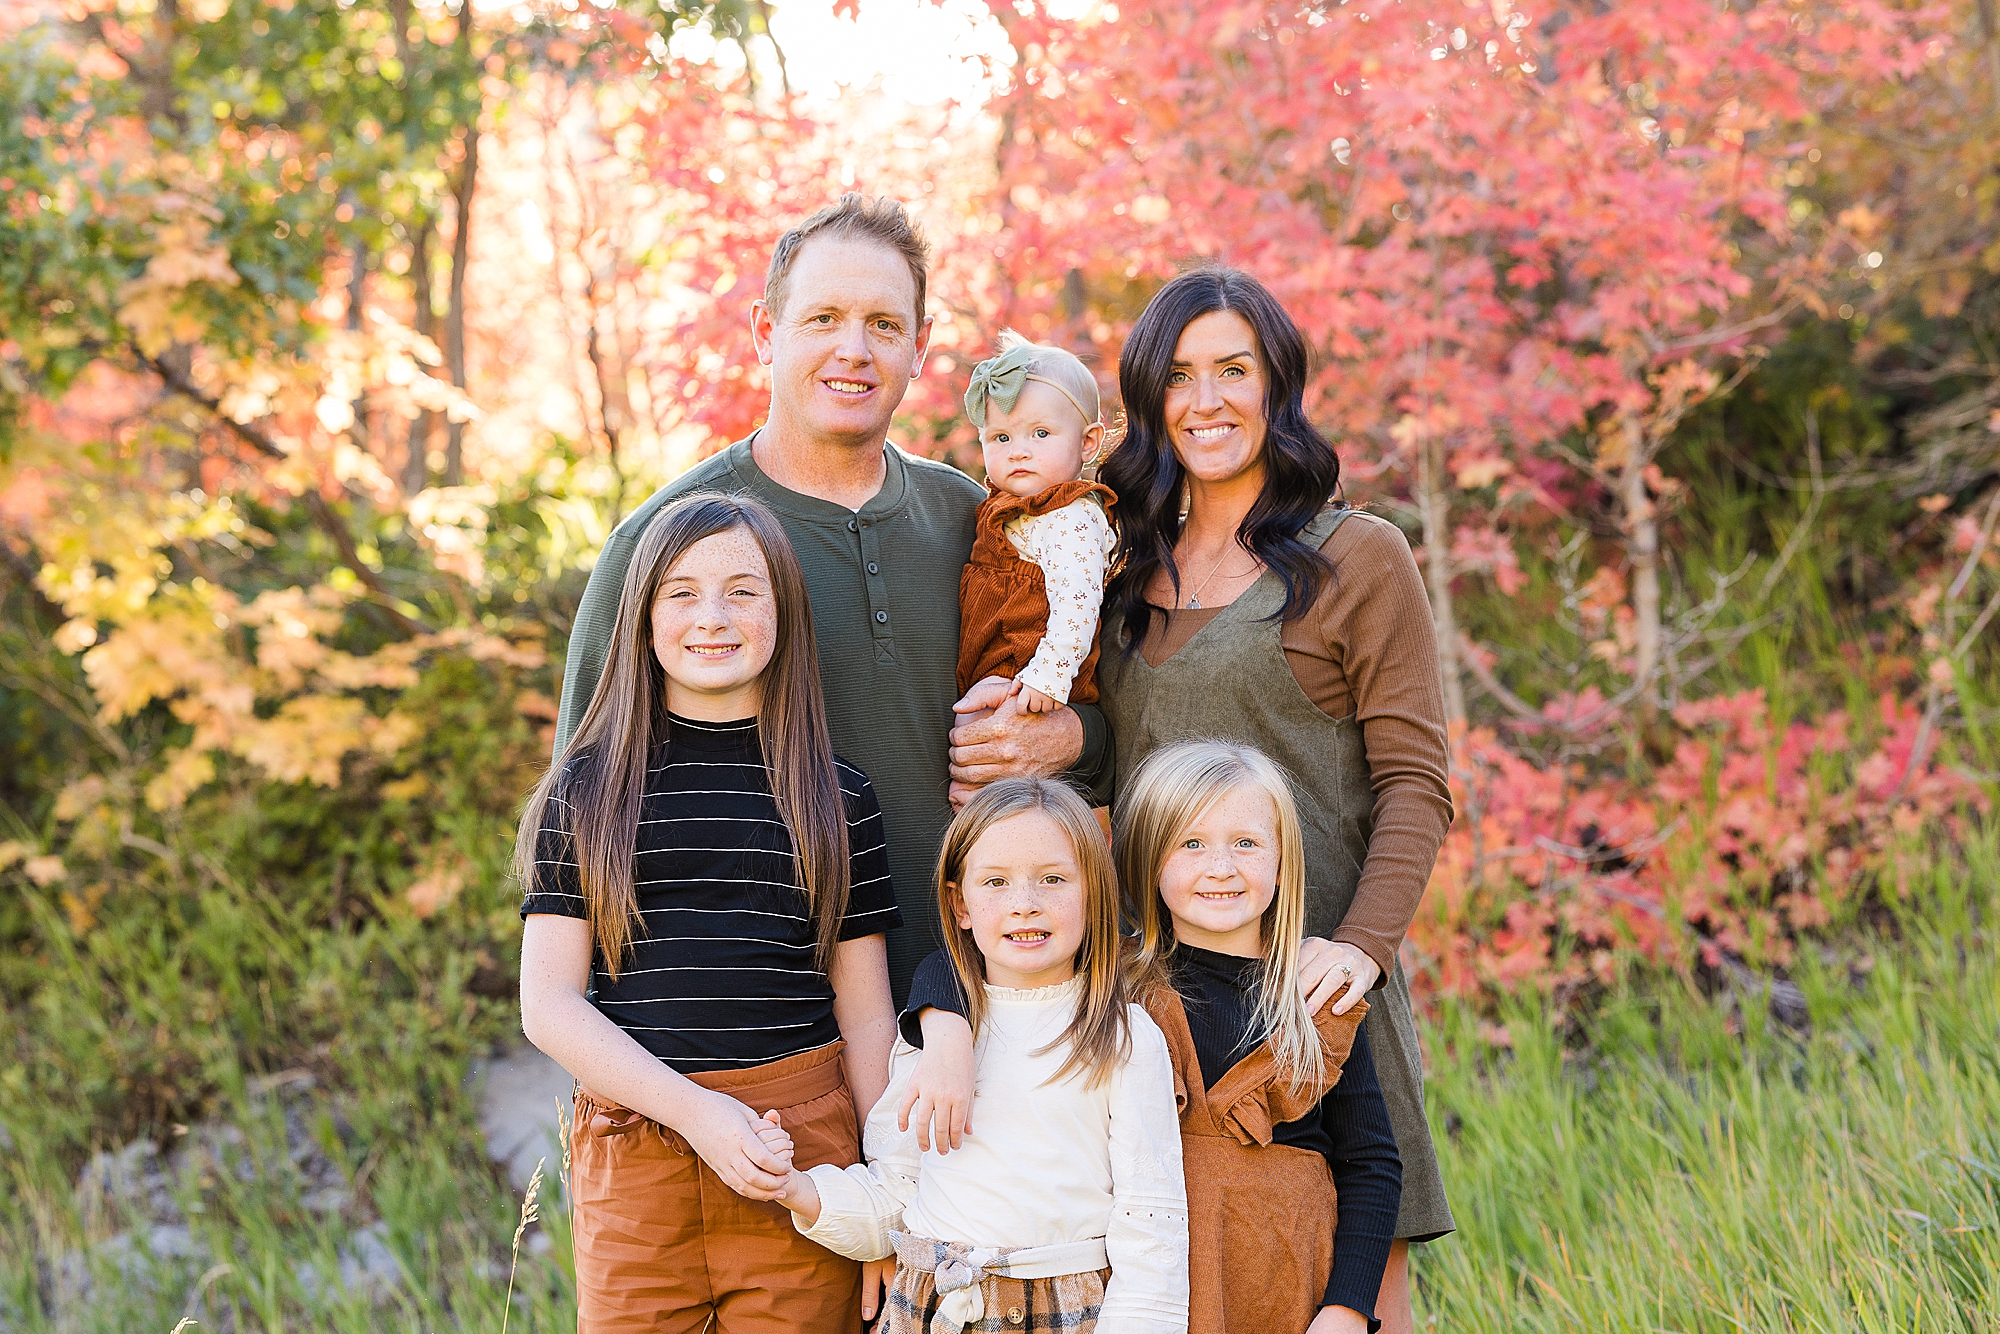 Utah fall leaves make the most beautiful backdrop for your fall family session!